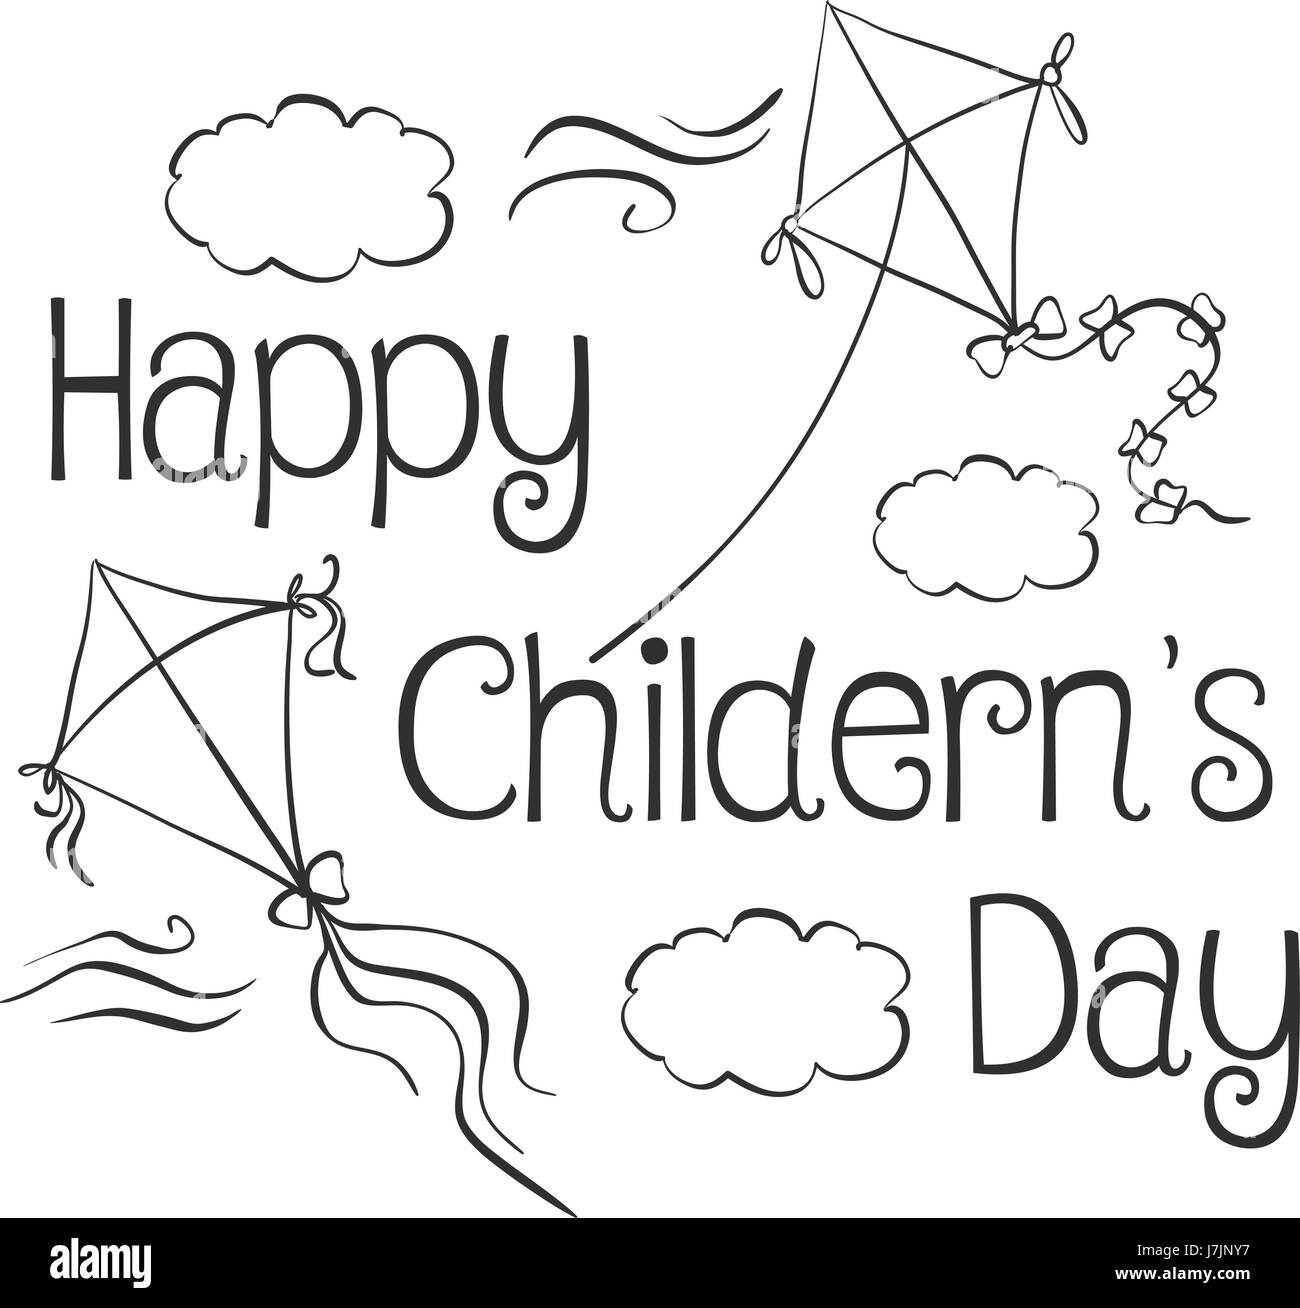 Happy Childrens Day Design For School Poster PNG, Clipart, Caricature,  Cartoon, Drawing, Traditionally Animated Film, Vector